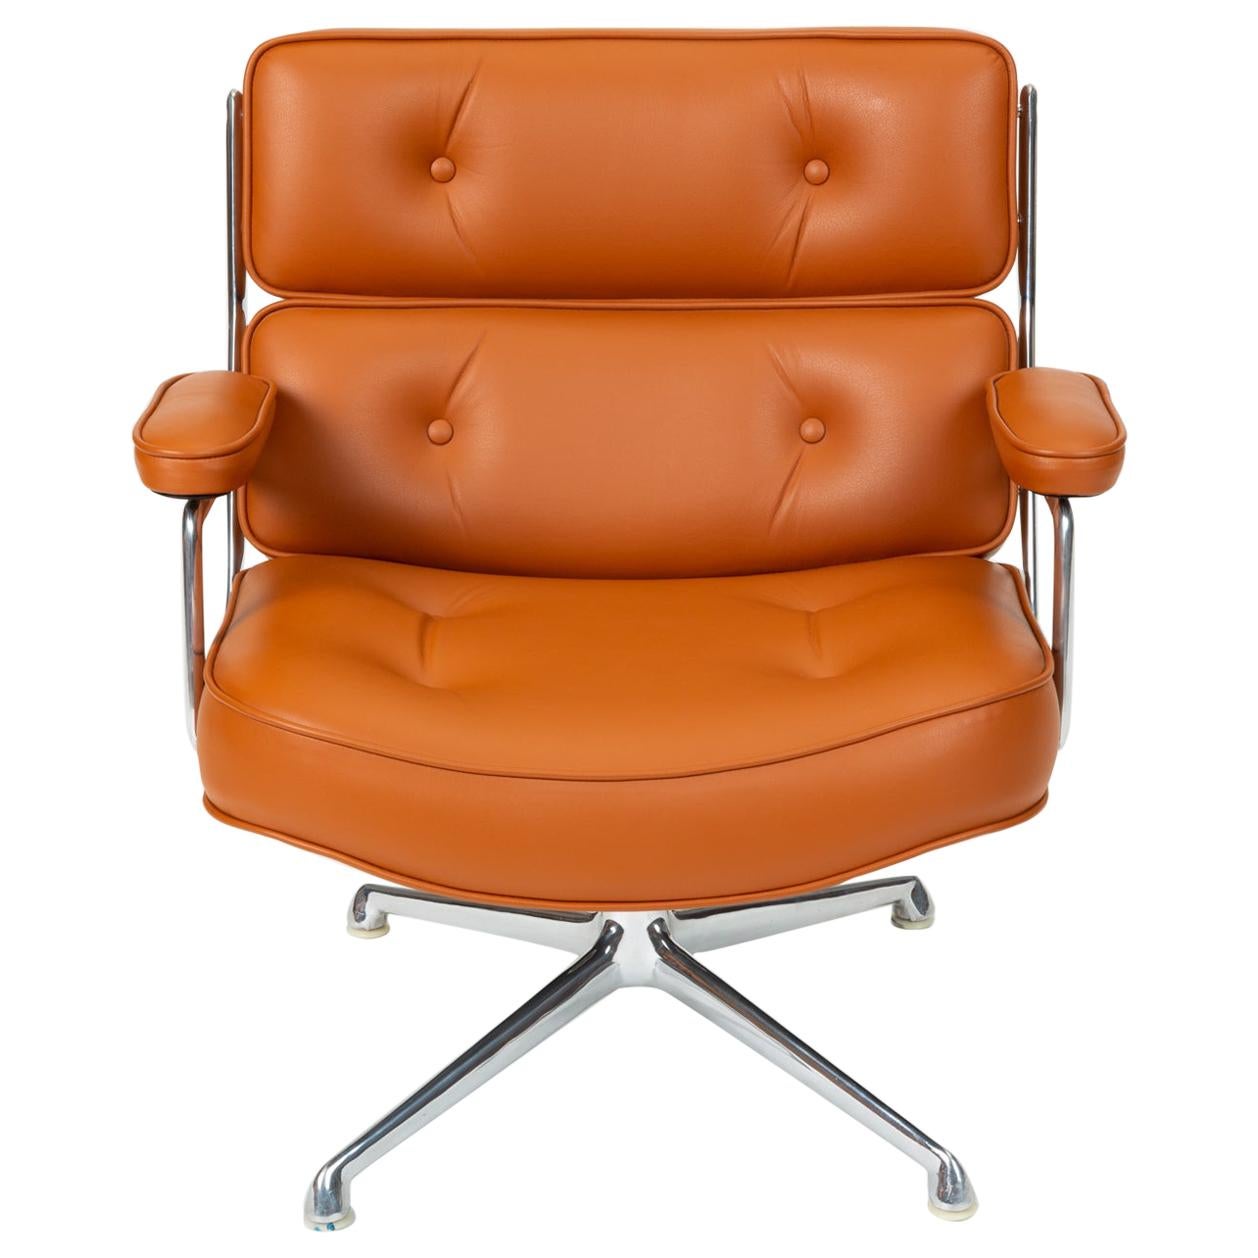 Ray and Charles Eames Time Life Lobby Chair with New Leather Upholstery